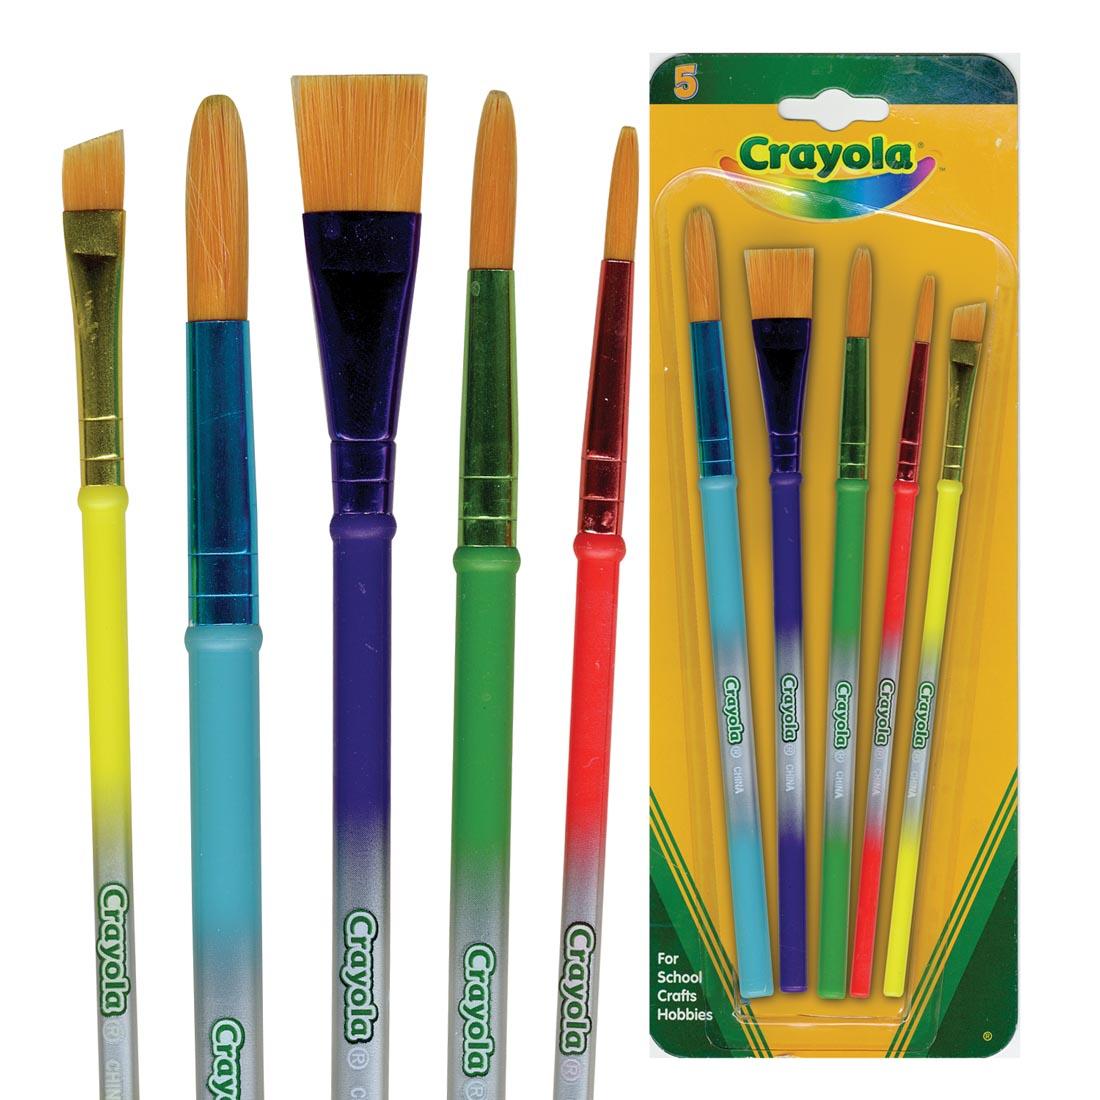 Crayola Brush Set shown inside the packaging, plus all 5 brushes are shown close-up